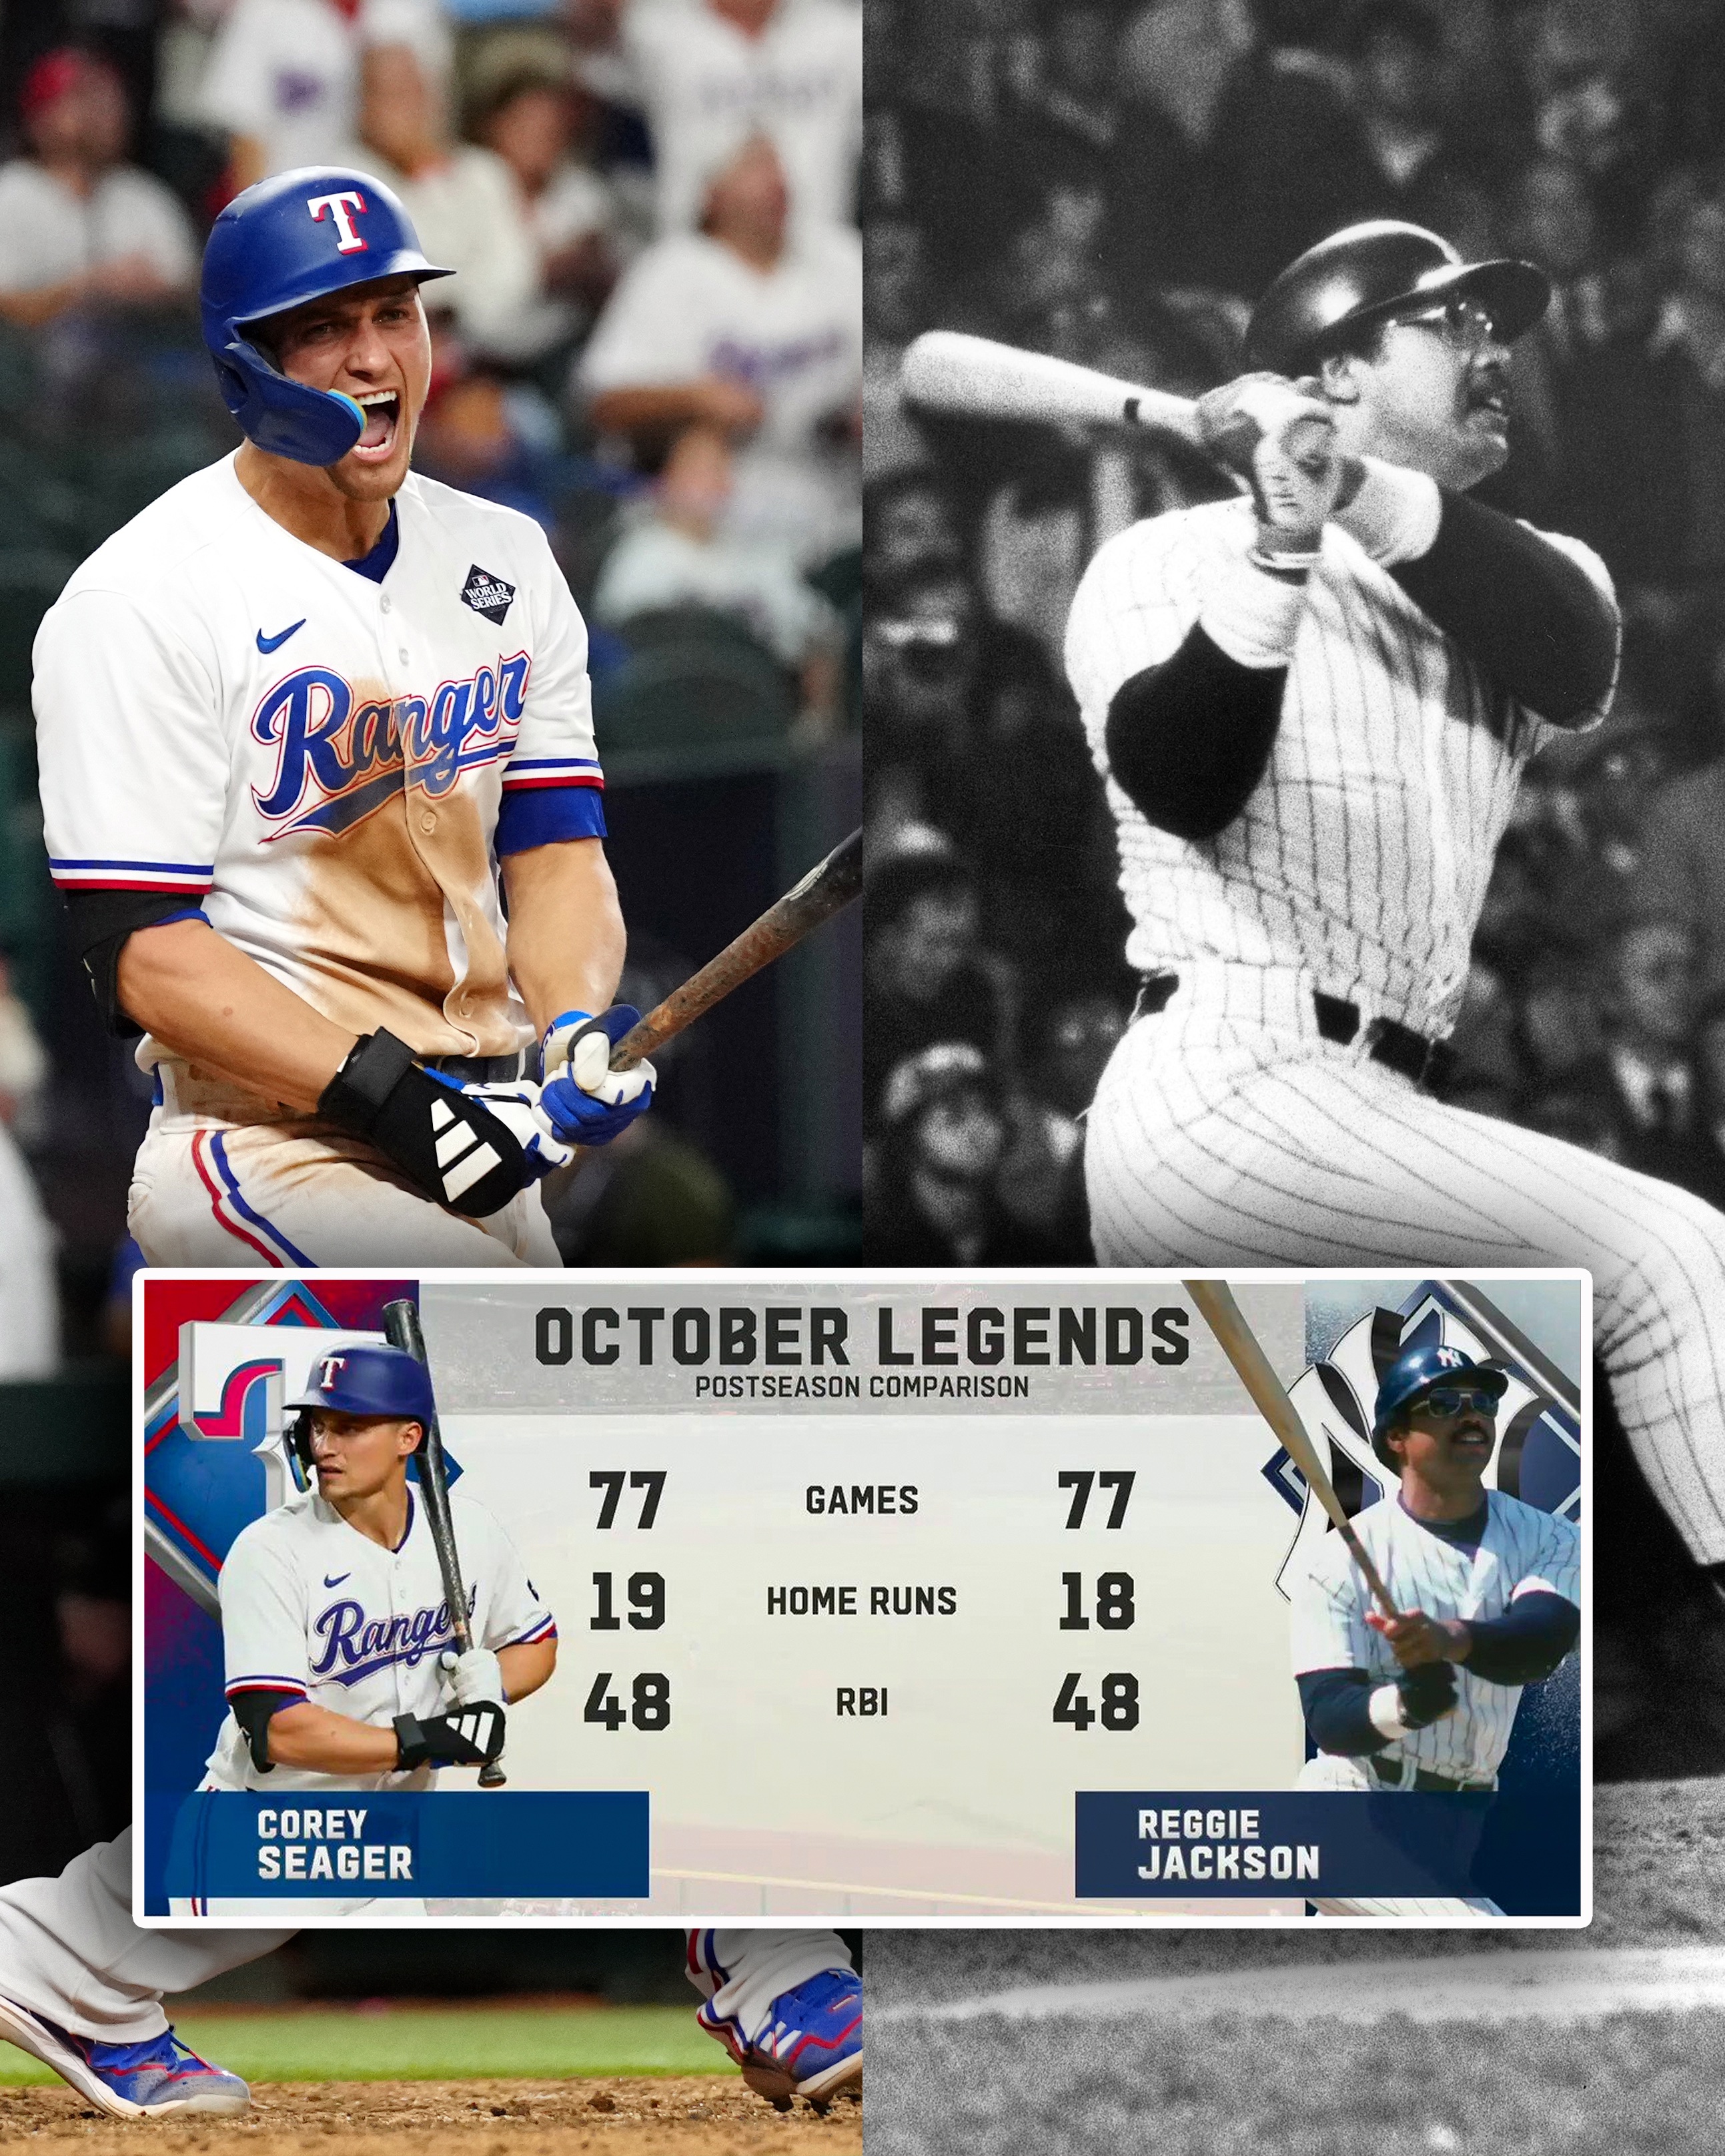 October Legends, Postseason Comparison
Corey Seager: 77 G, 19 HR, 48 RBI
Reggie Jackson: 77 G, 18 HR, 48 RBI.
Pictured: Corey Seager yelling in a home white Texas Rangers uniform (left). Reggie Jackson swinging a bat in a home white pinstriped New York Yankees uniform (right).